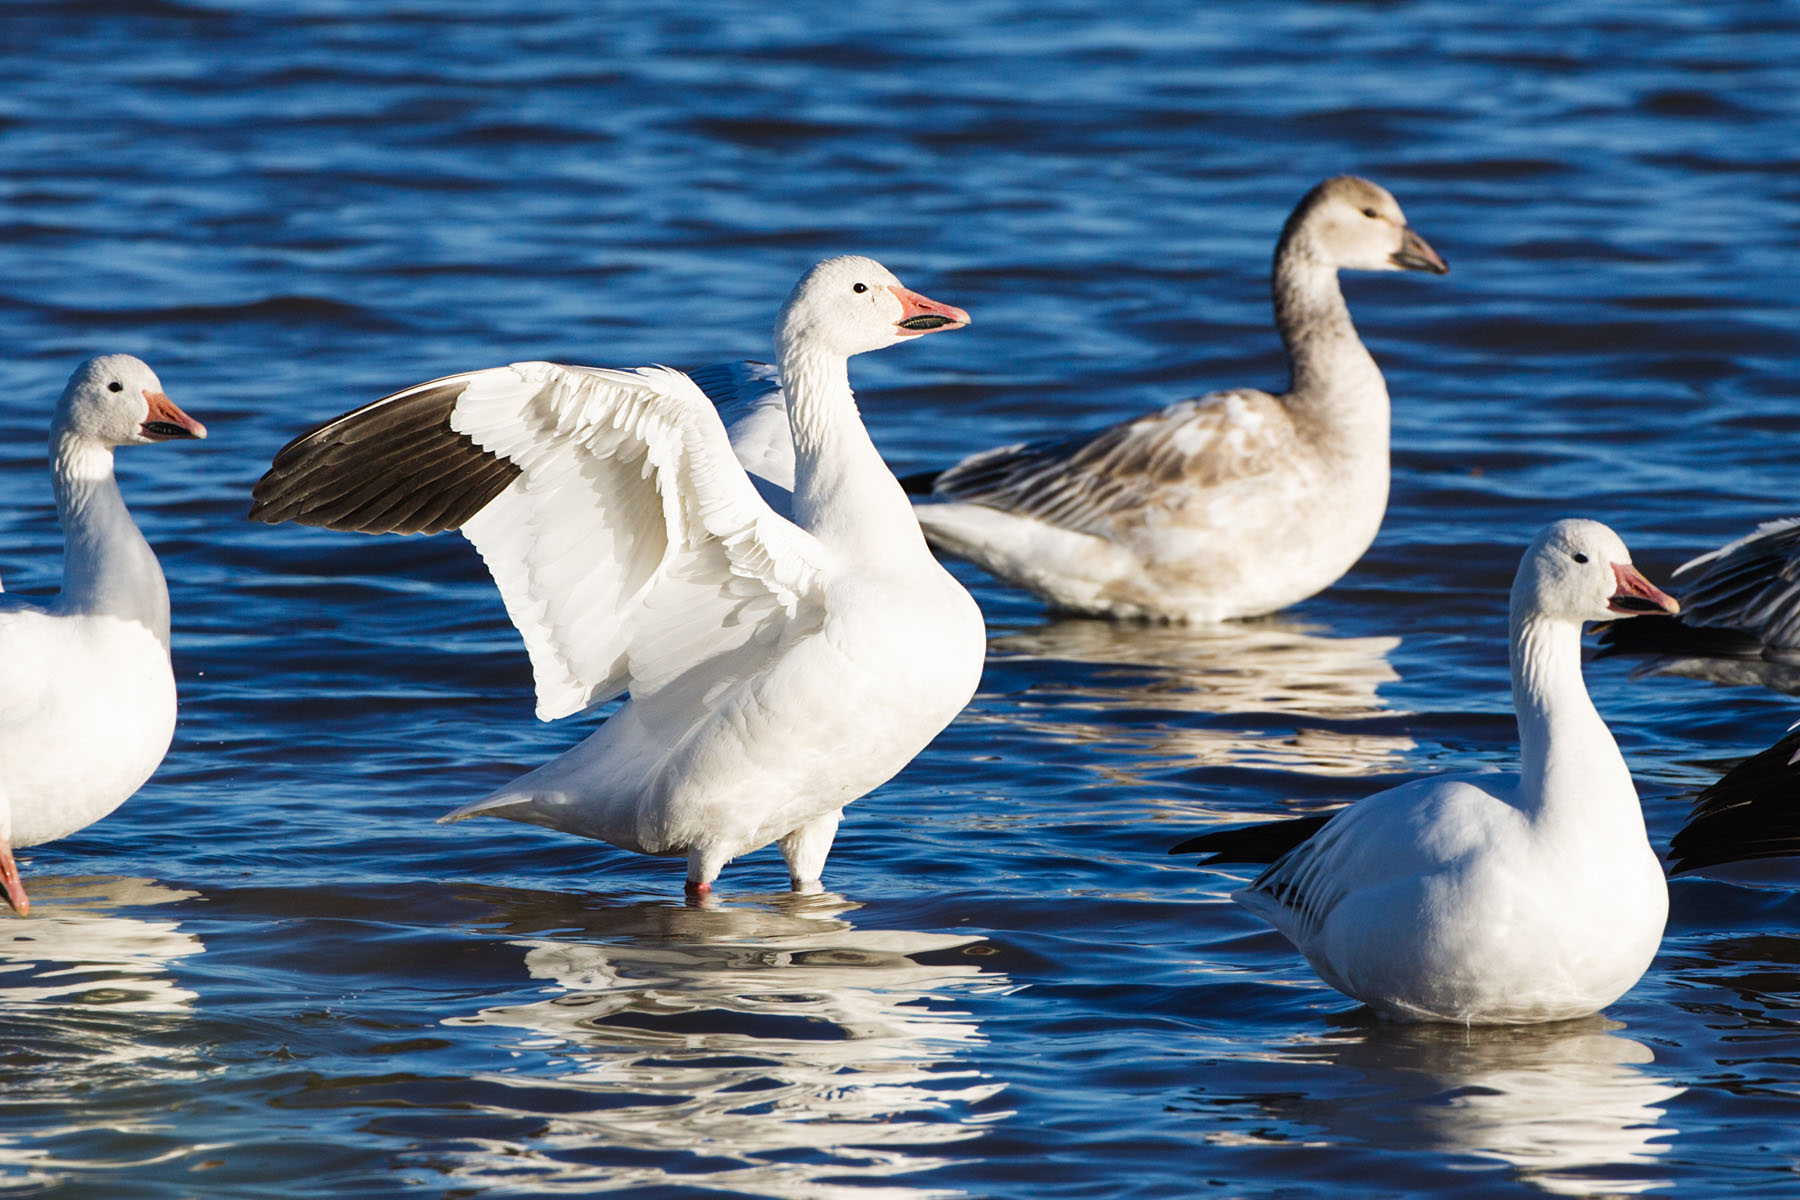 Snow geese, Bosque del Apache NWR, NM.  Click for next photo.